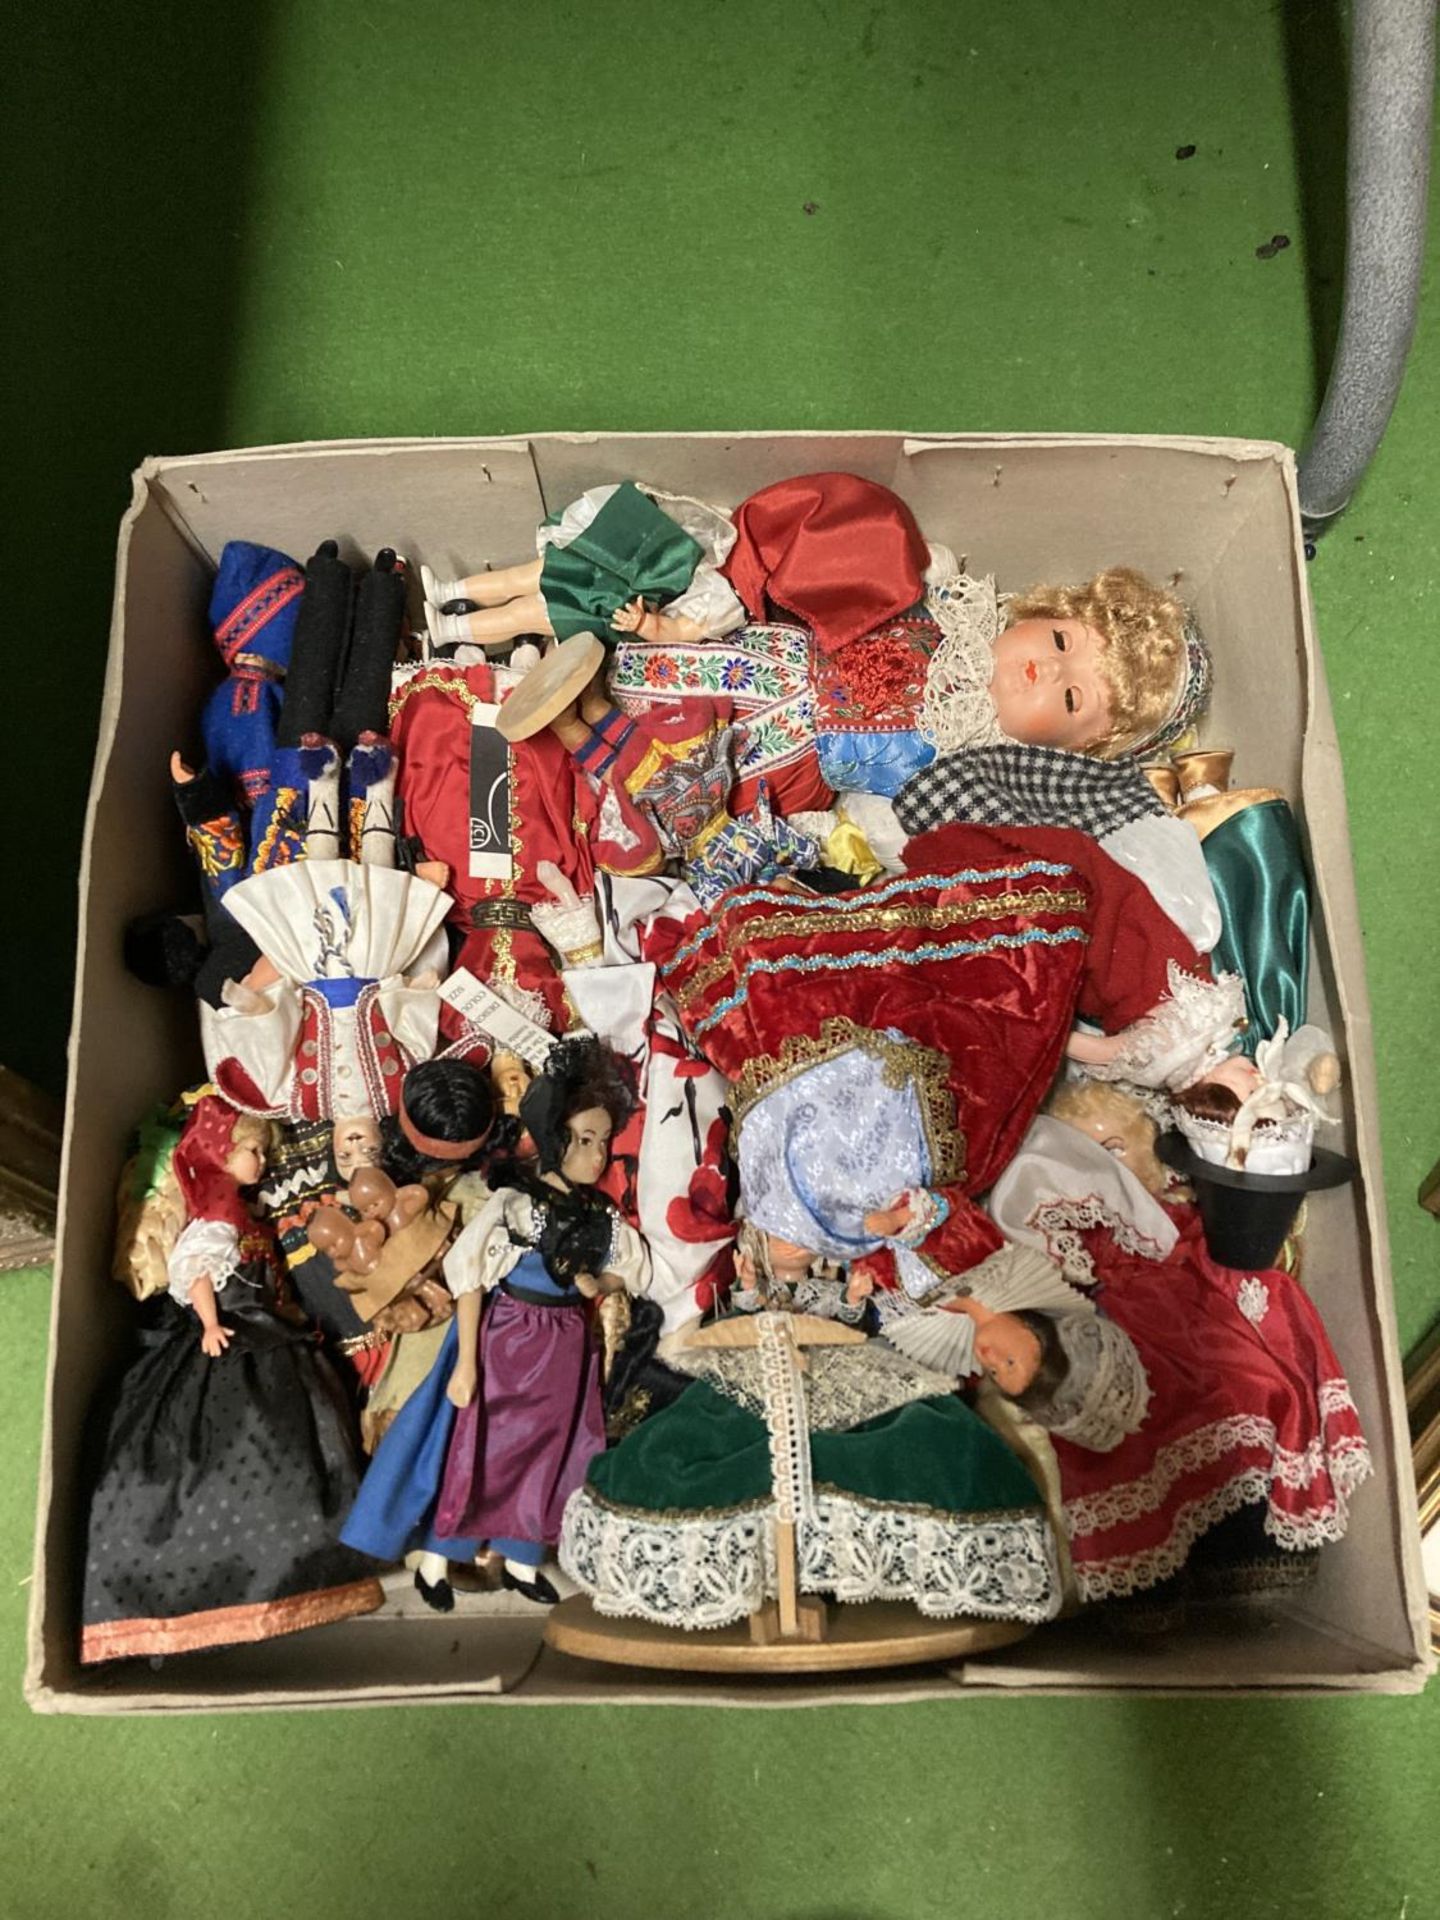 A LARGE COLLECTION OF DOLLS FROM AROUND THE WORLD